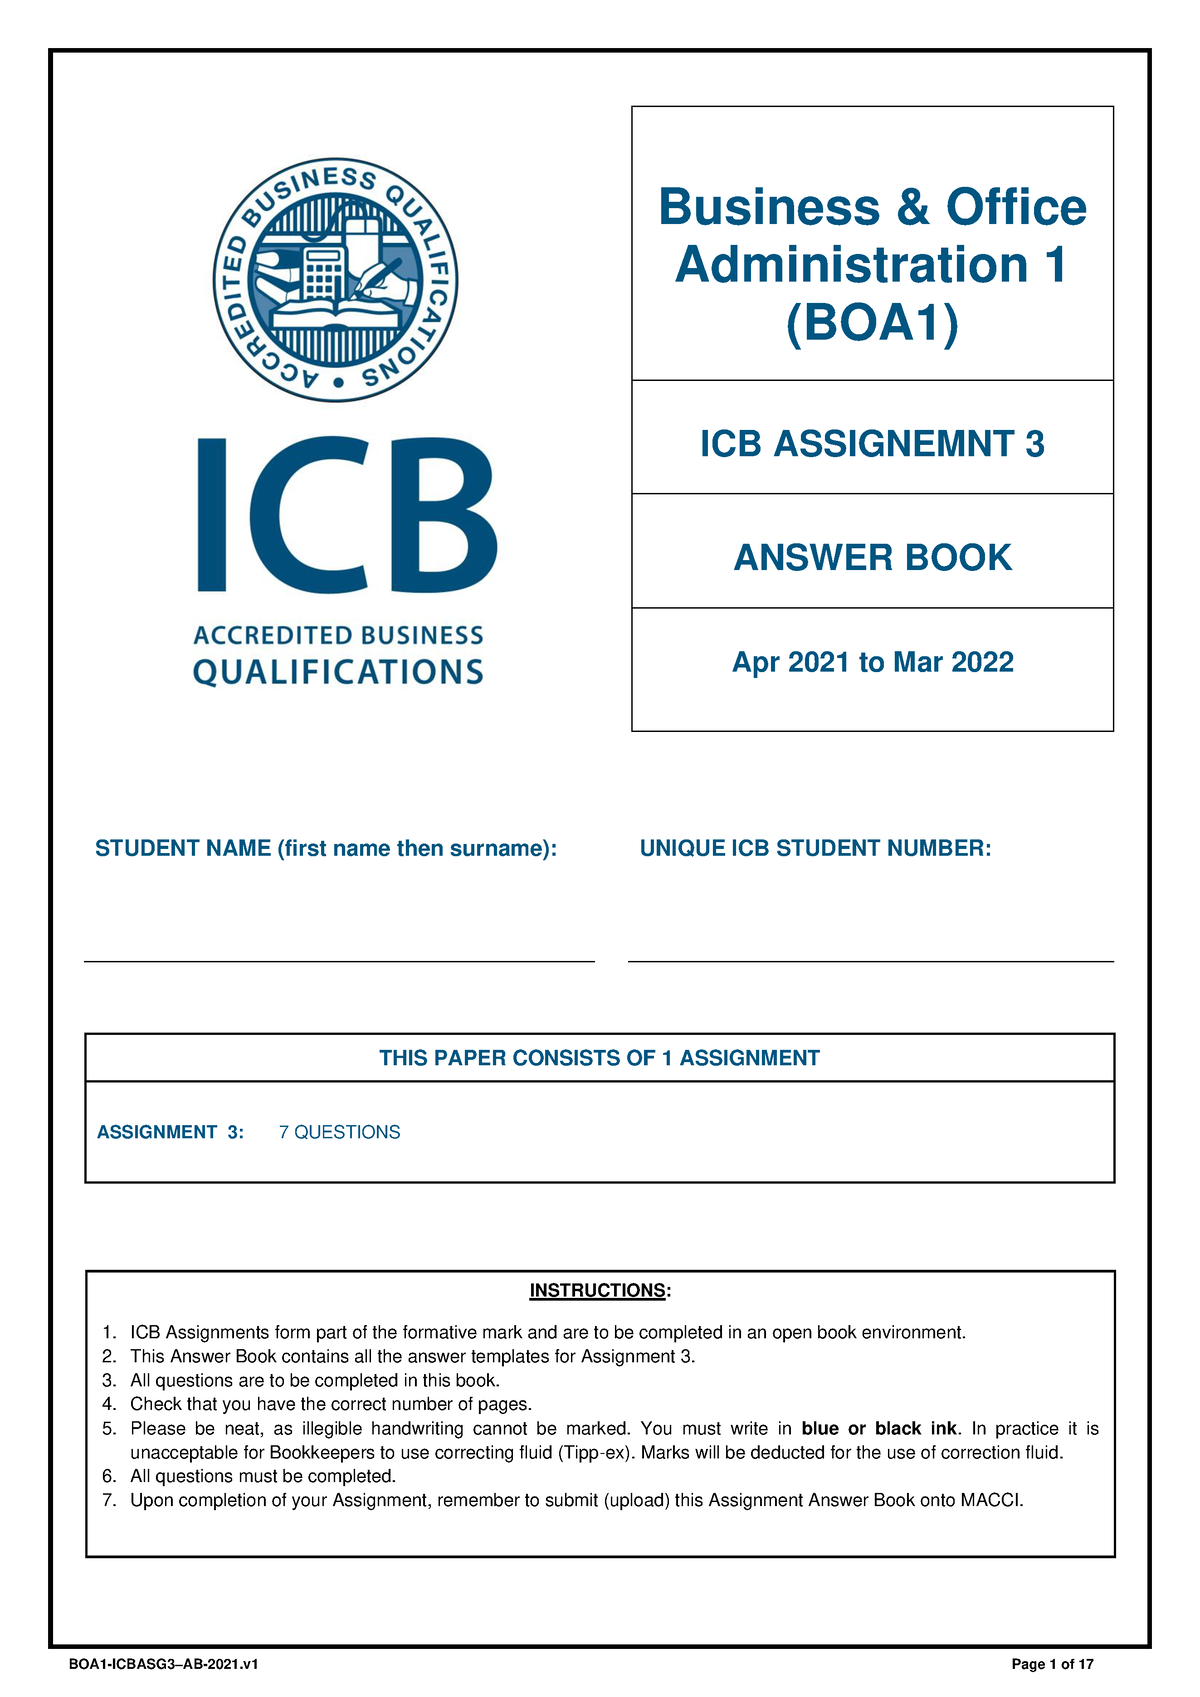 BOA1-ICB Assignment 3-AB-2021 - Business & Office Administration 1  (BOA1) ICB ASSIGNEMNT 3 - Studocu